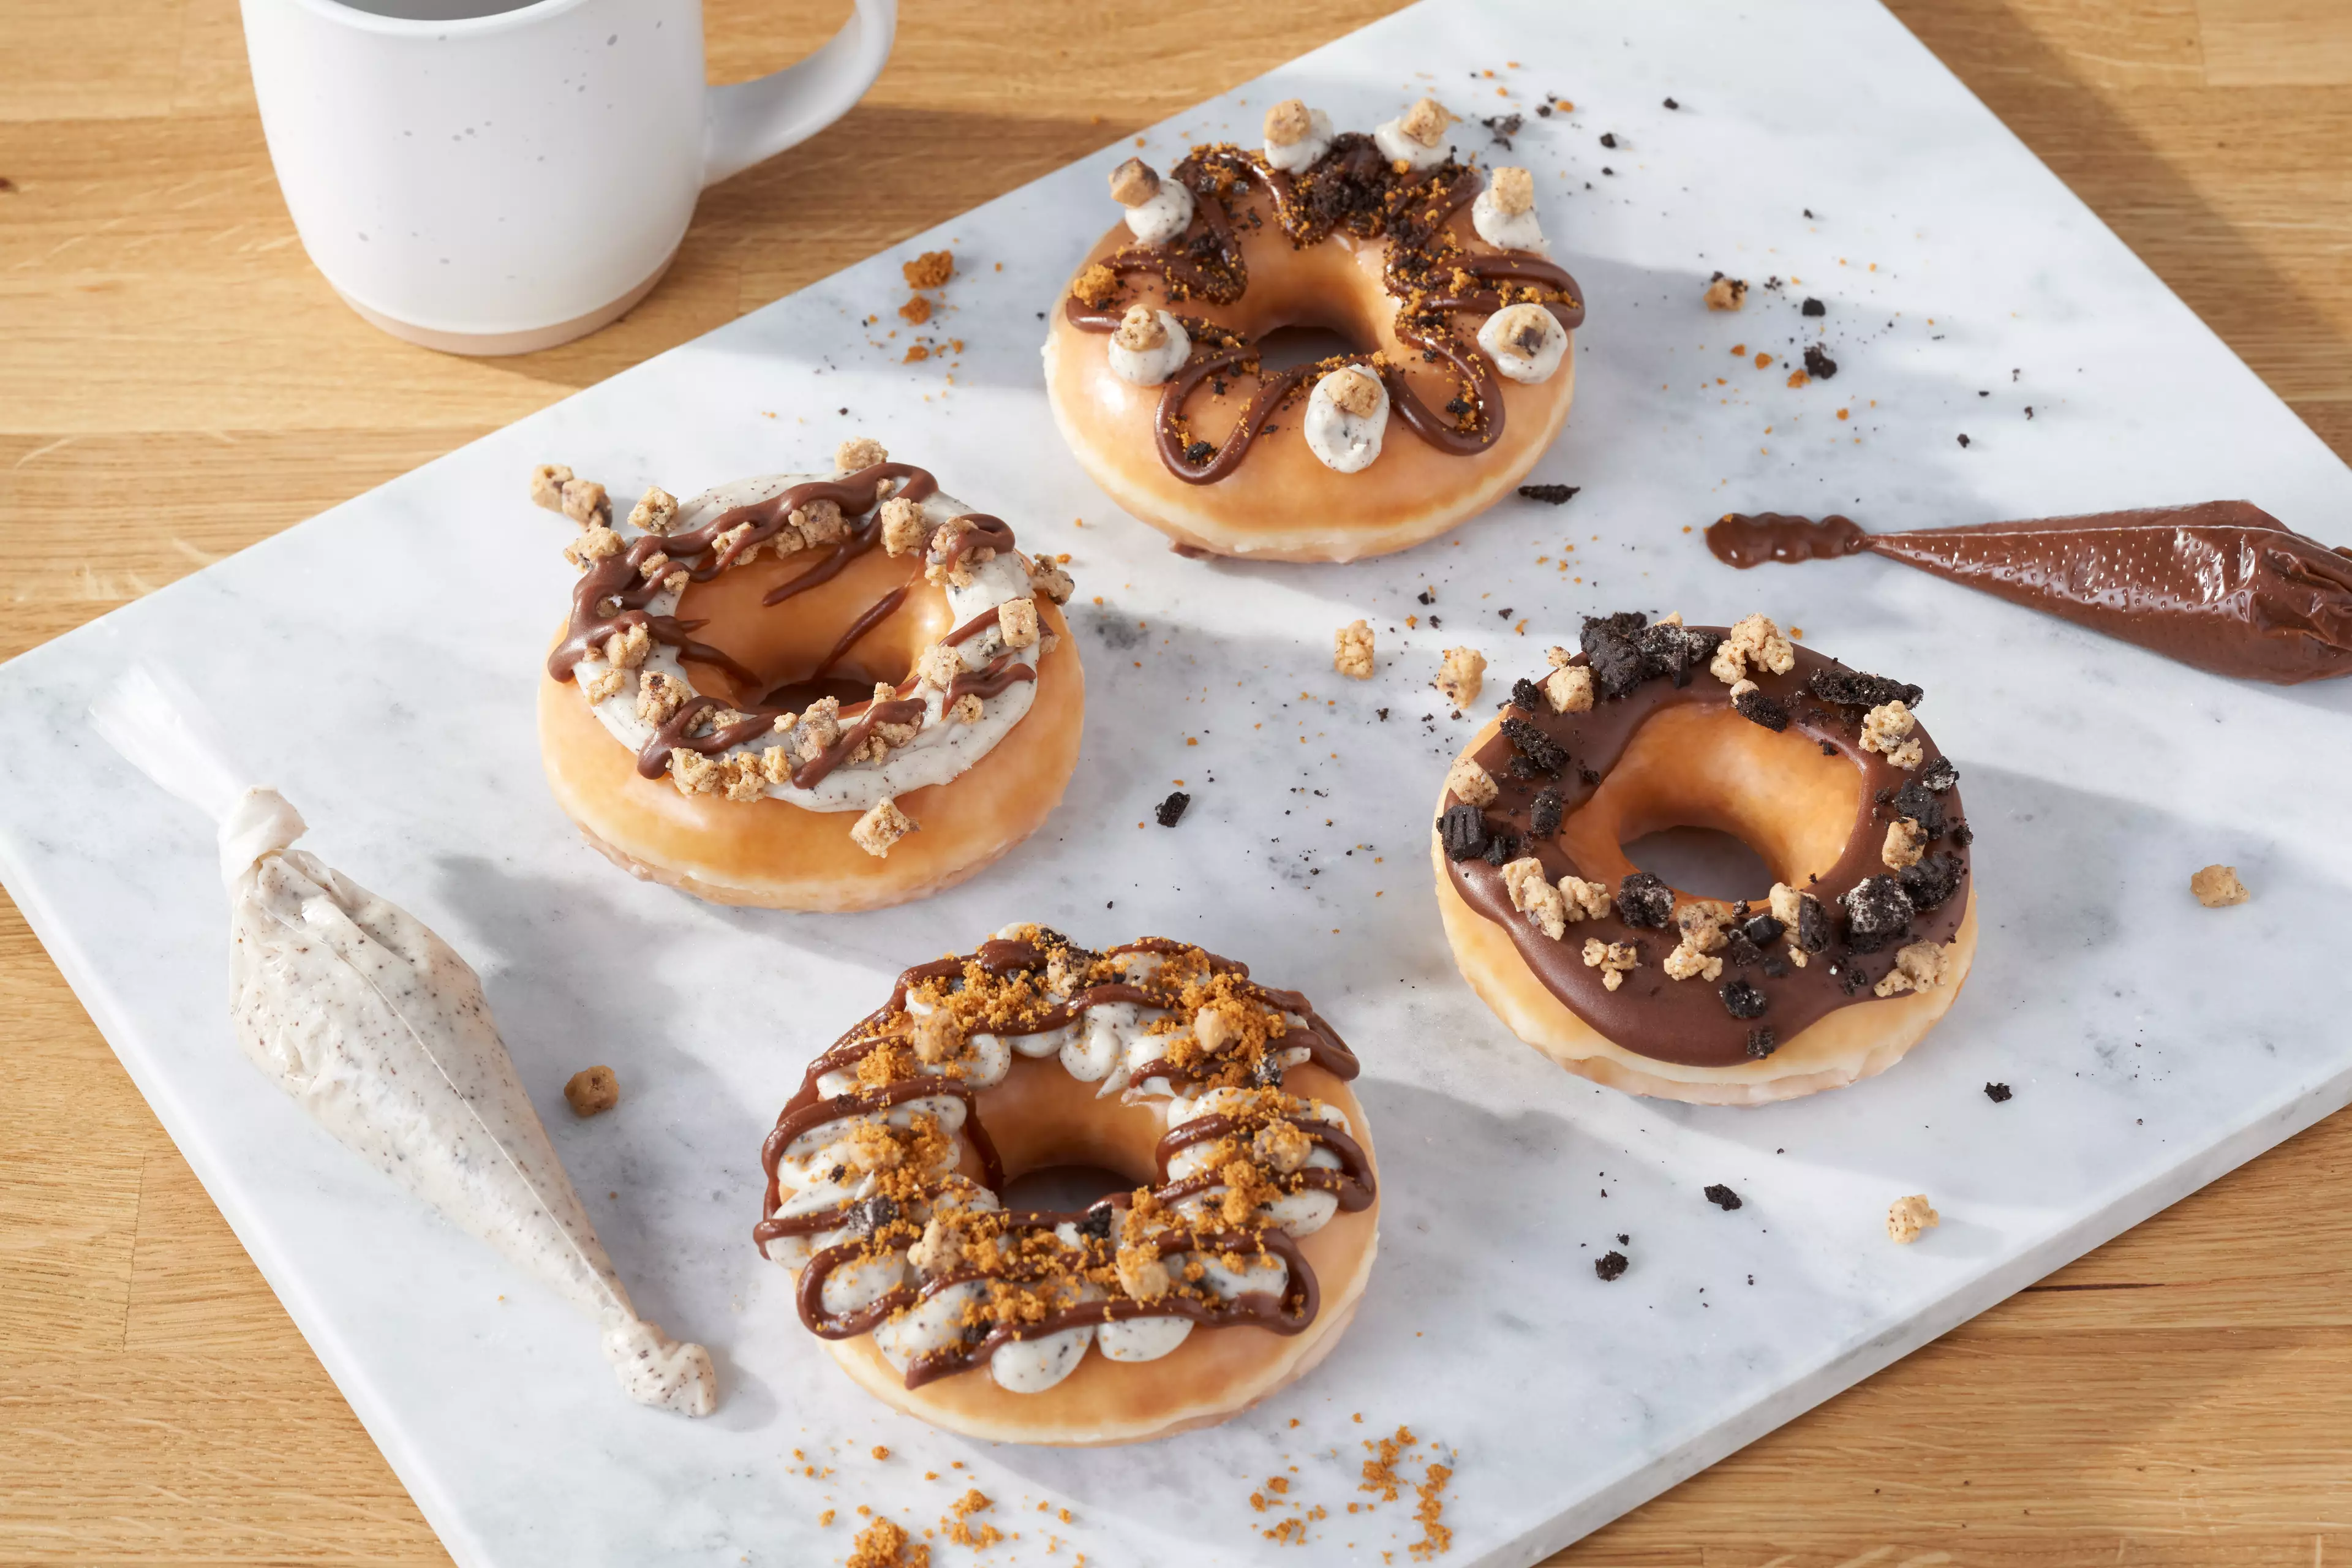 You can make your own versions of the classic cookies and kreme doughnut (